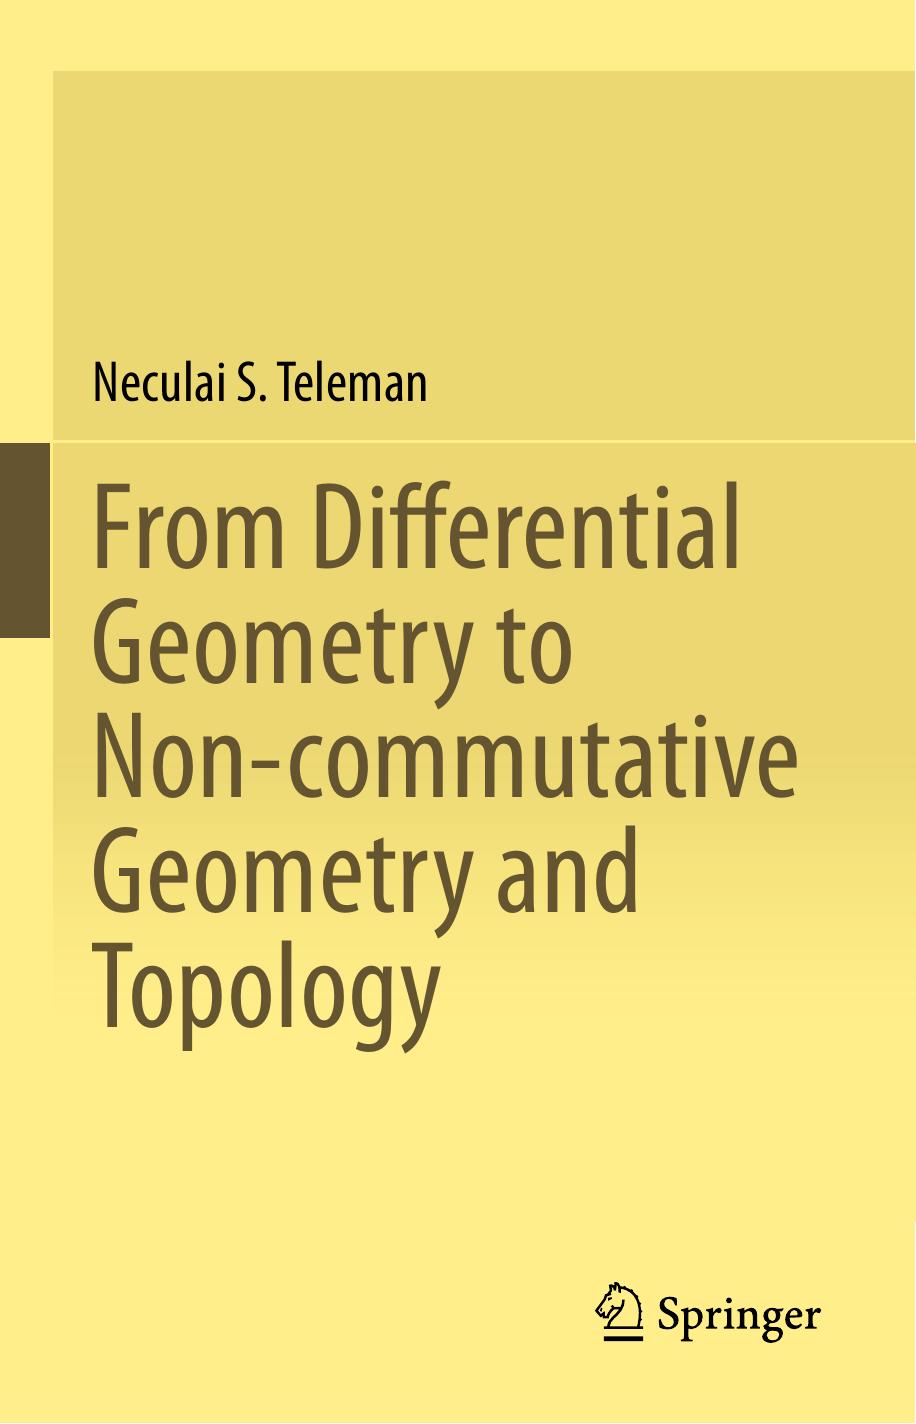 From Differential Geometry to Non-commutative Geometry and Topology by Neculai S. Teleman